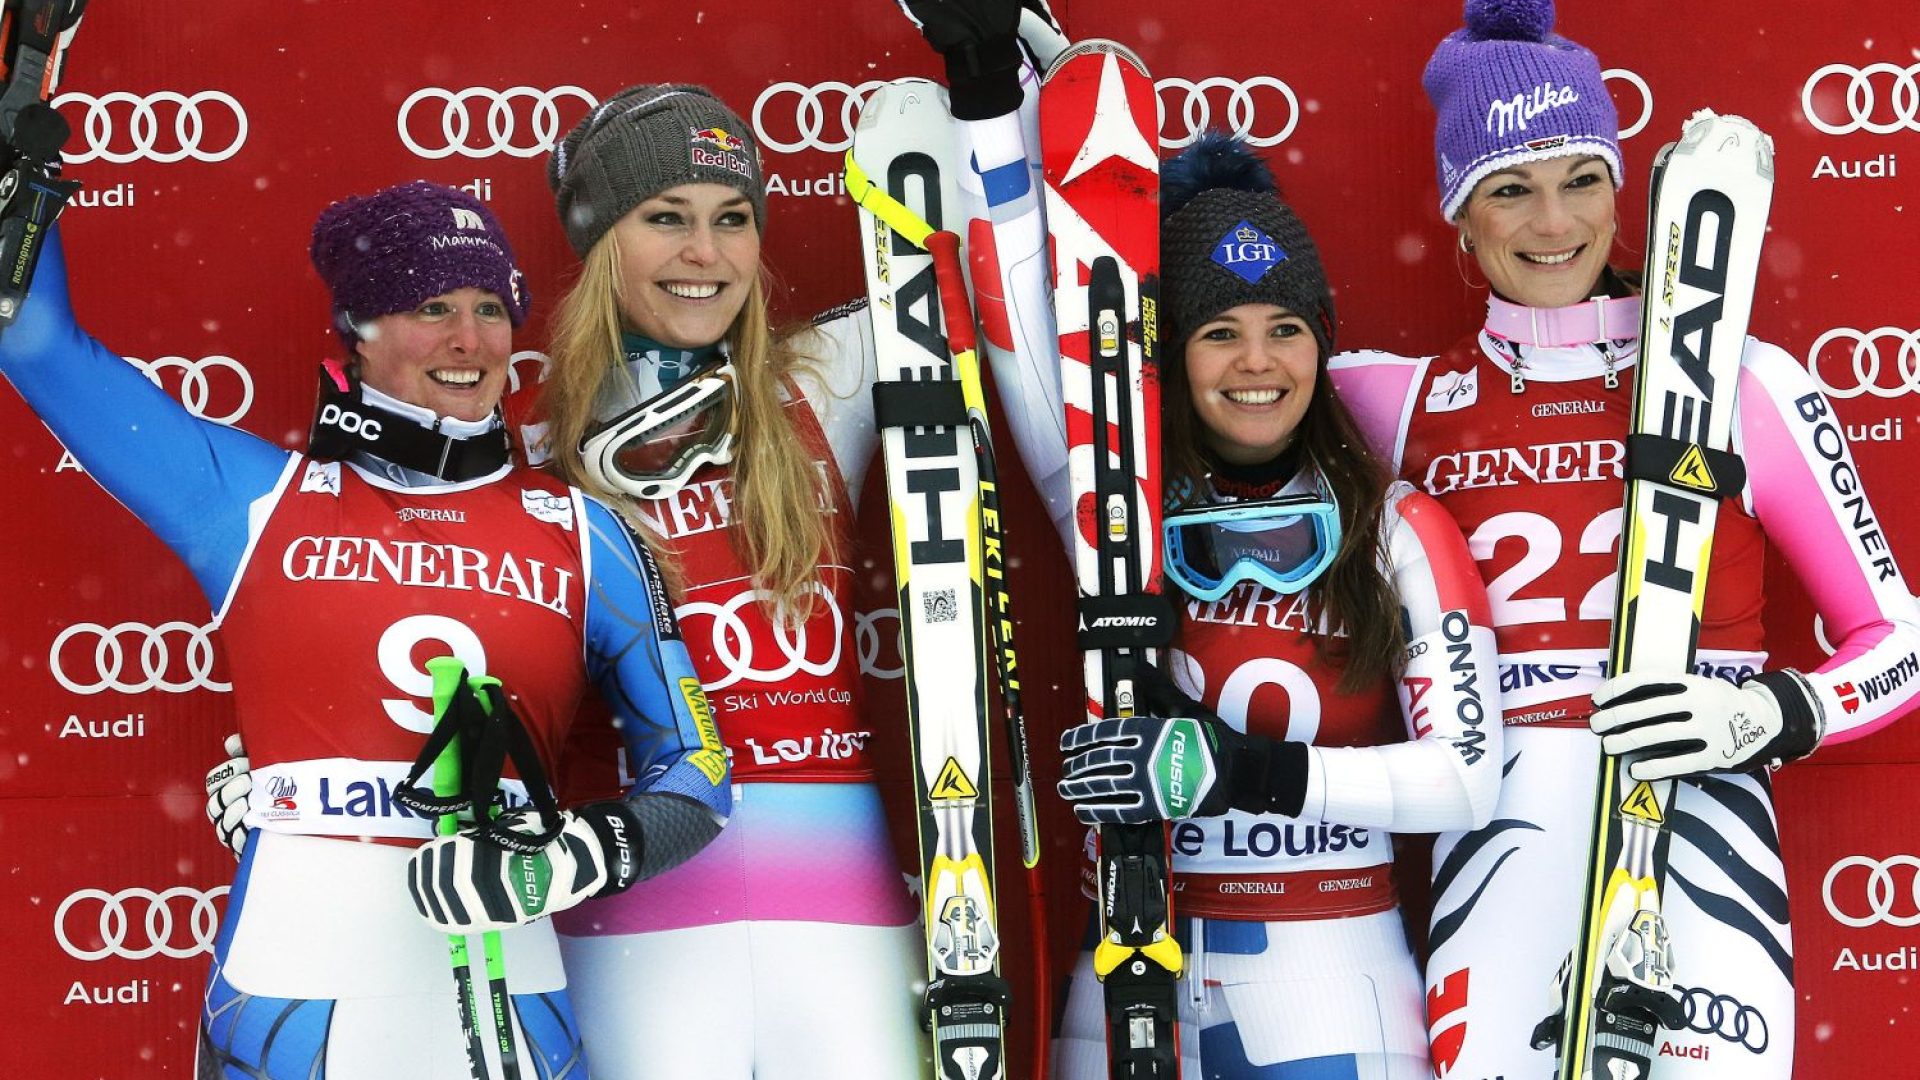 dh-in-lake-louise-from-left-to-right-stacey-cook-usa-2nd-lindsey-vonn-usa-1st-tina-weirather-lie-3rd-and-maria-hoefl-riesch-ger-3rd